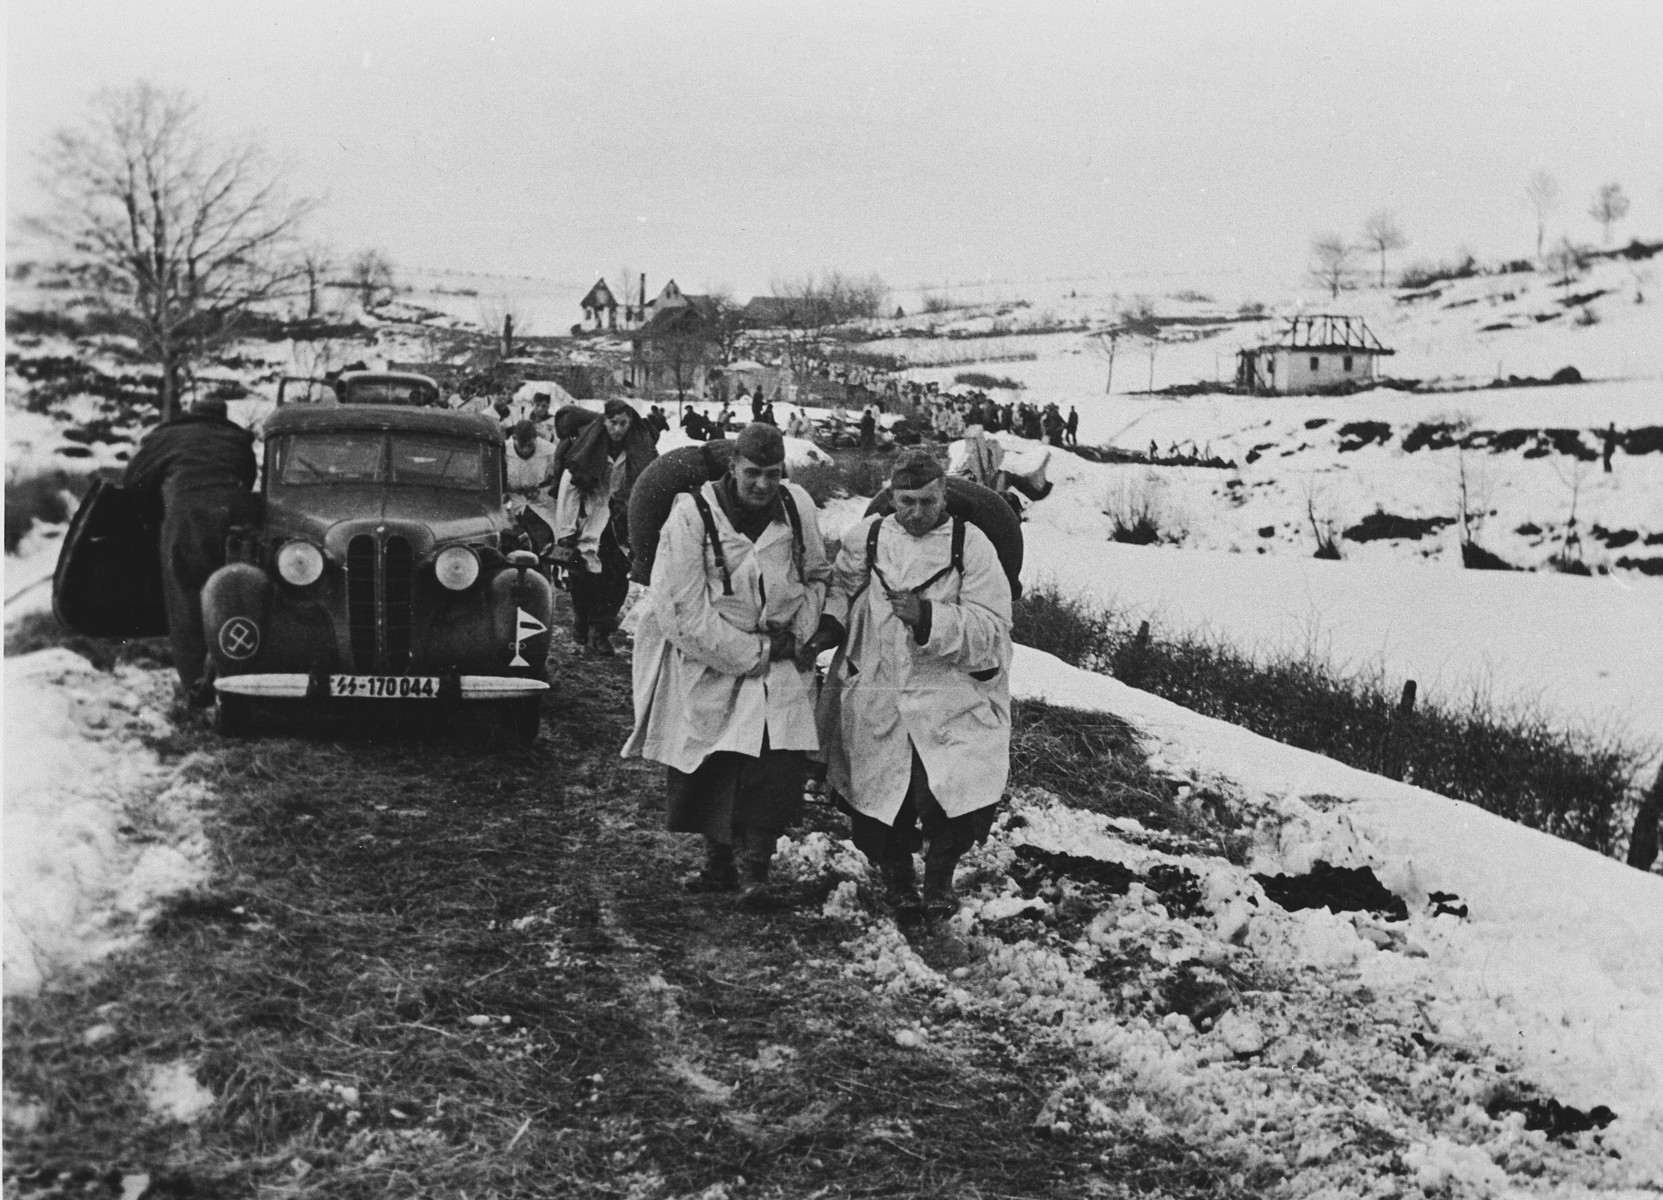 Members of the "Prinz Eugen" Division march down a road near the town of Grahovo, Croatia.

The original caption (translated) reads, "Tanks are brought into action against the enemy in Grahowo."

One of a series of photographs taken by the 7th SS Volunteer Mountain Division Prinz Eugen in Croatia, Serbia, and Montenegro from 1942 to 1944, after the German invasion of the Kingdom of Yugoslavia. The photographs are believed to have been captioned by the commanding office of the Waffen-SS, and had been in the possession of  Friedrich Wilhem Krueger, who served with the division from November 1943 until April 1944.